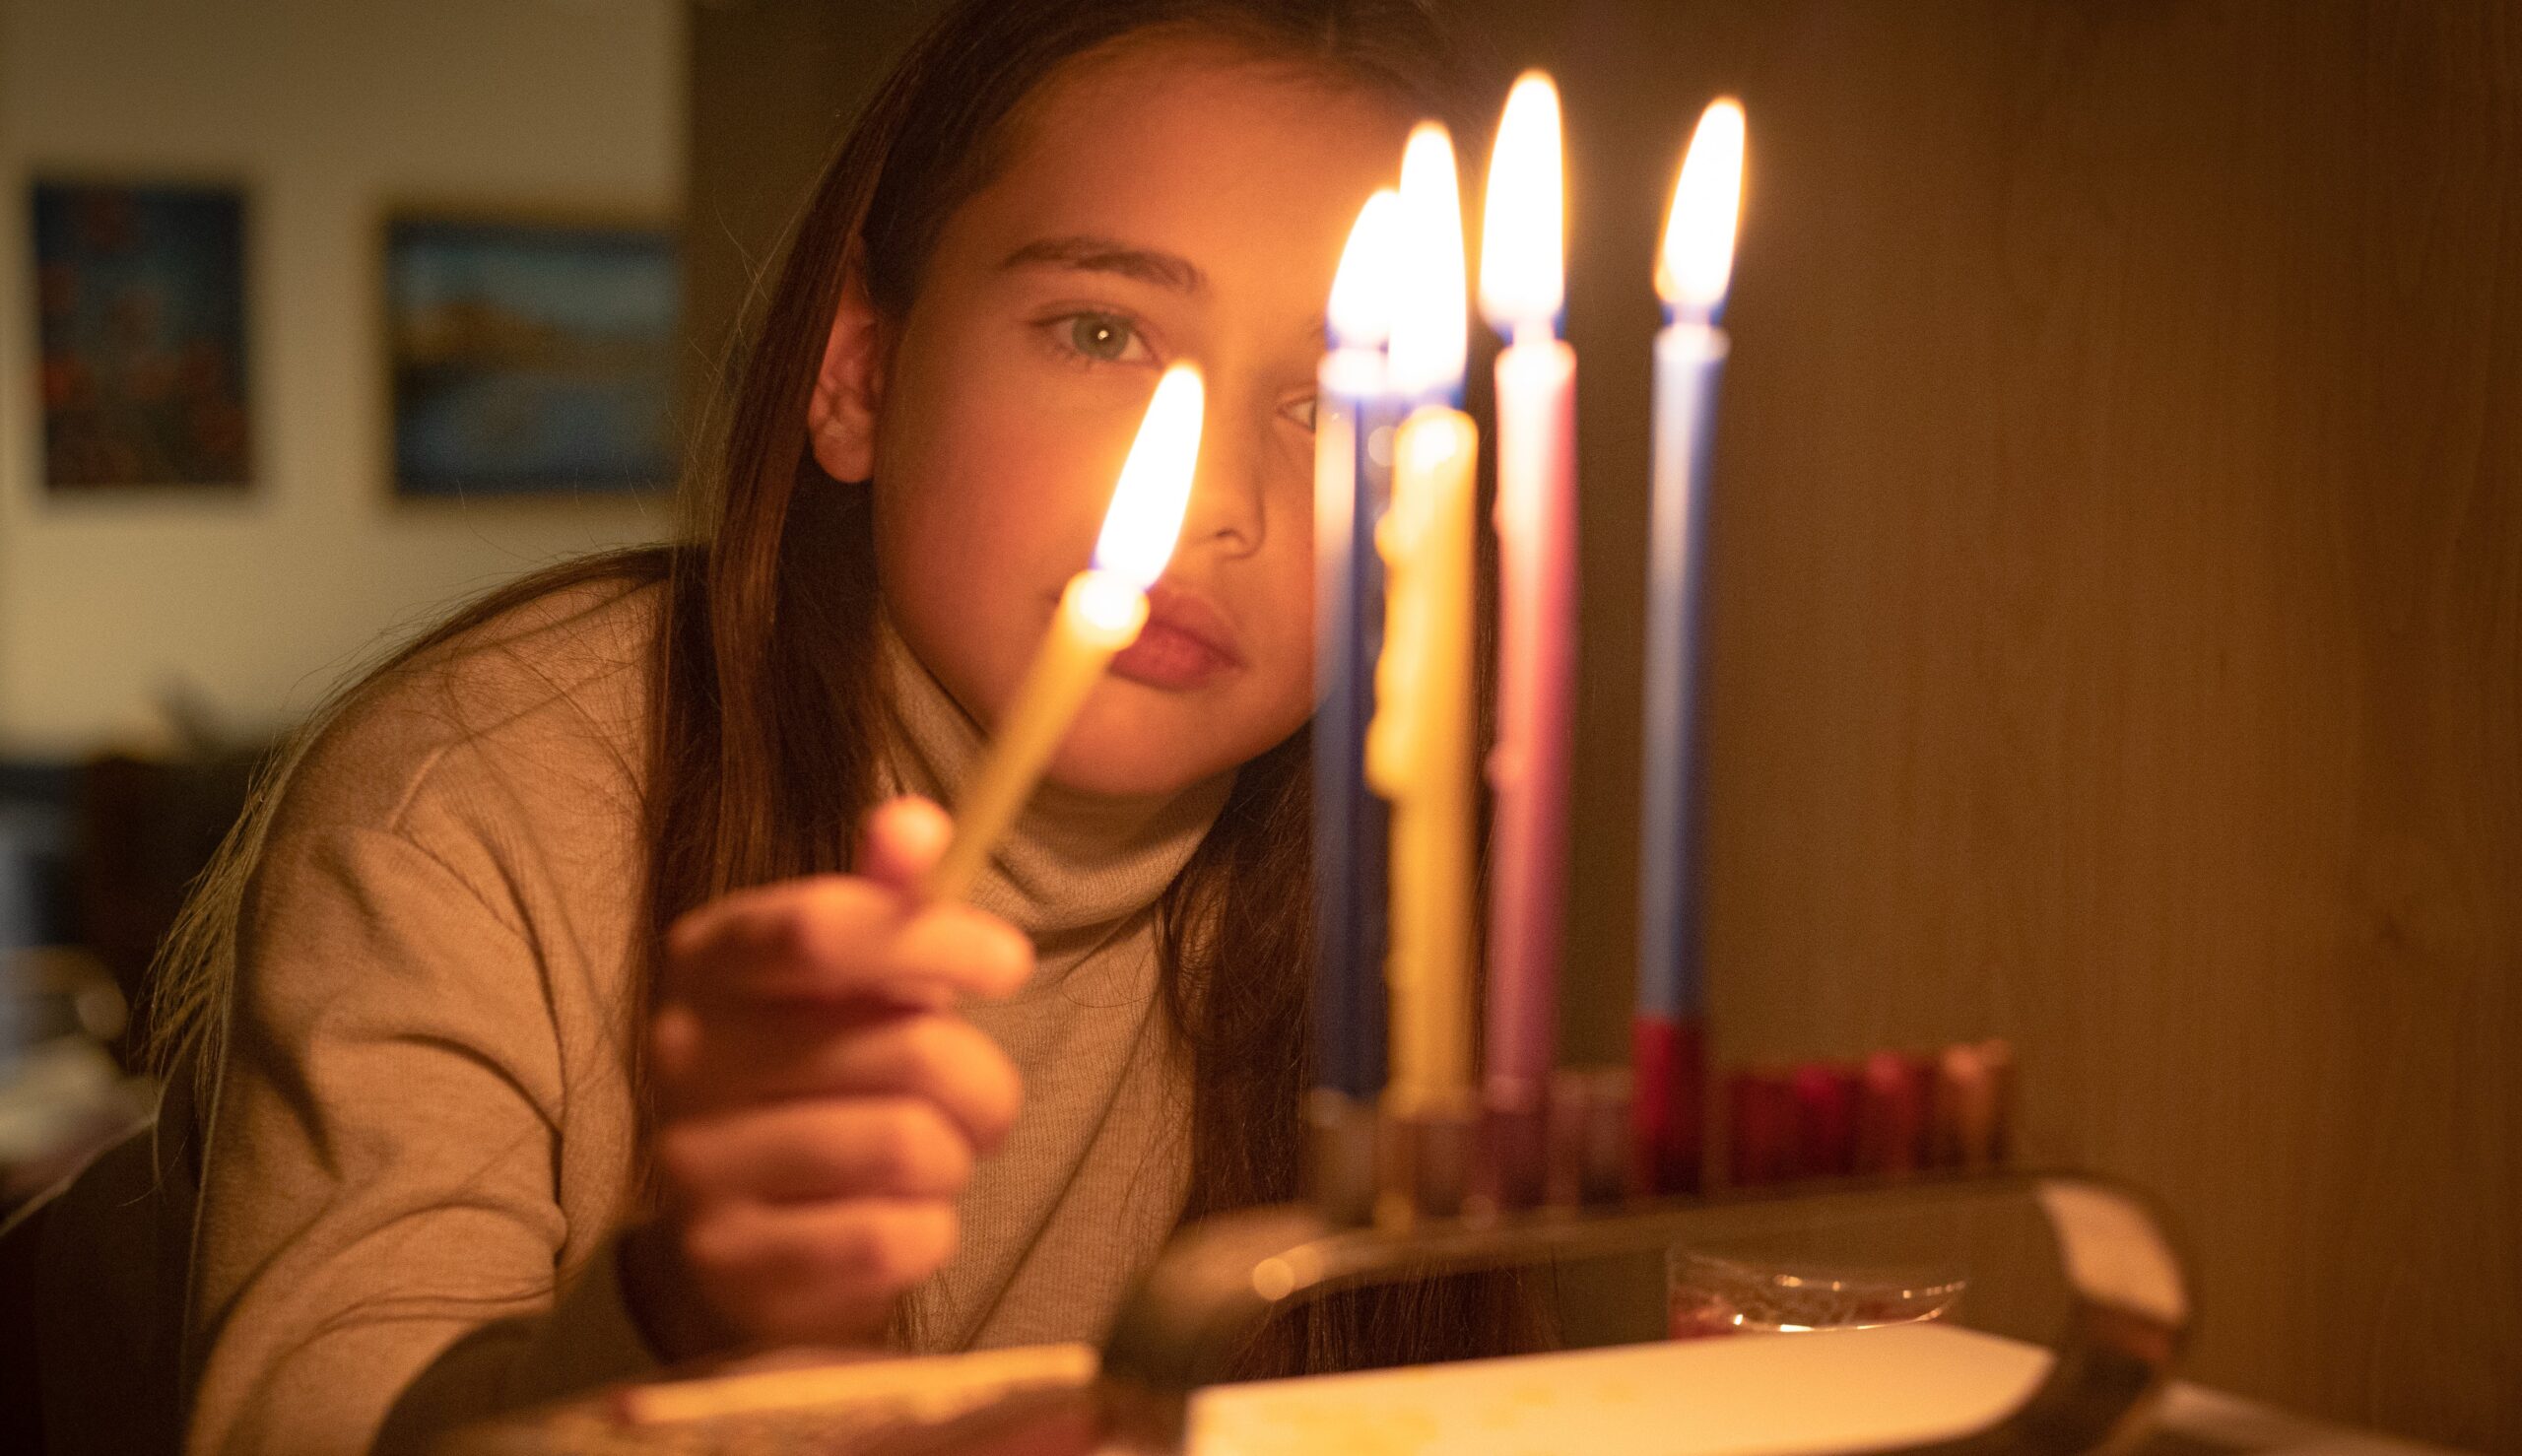 Reflections on Chanukah and on Light and Darkness from an Educational Perspective